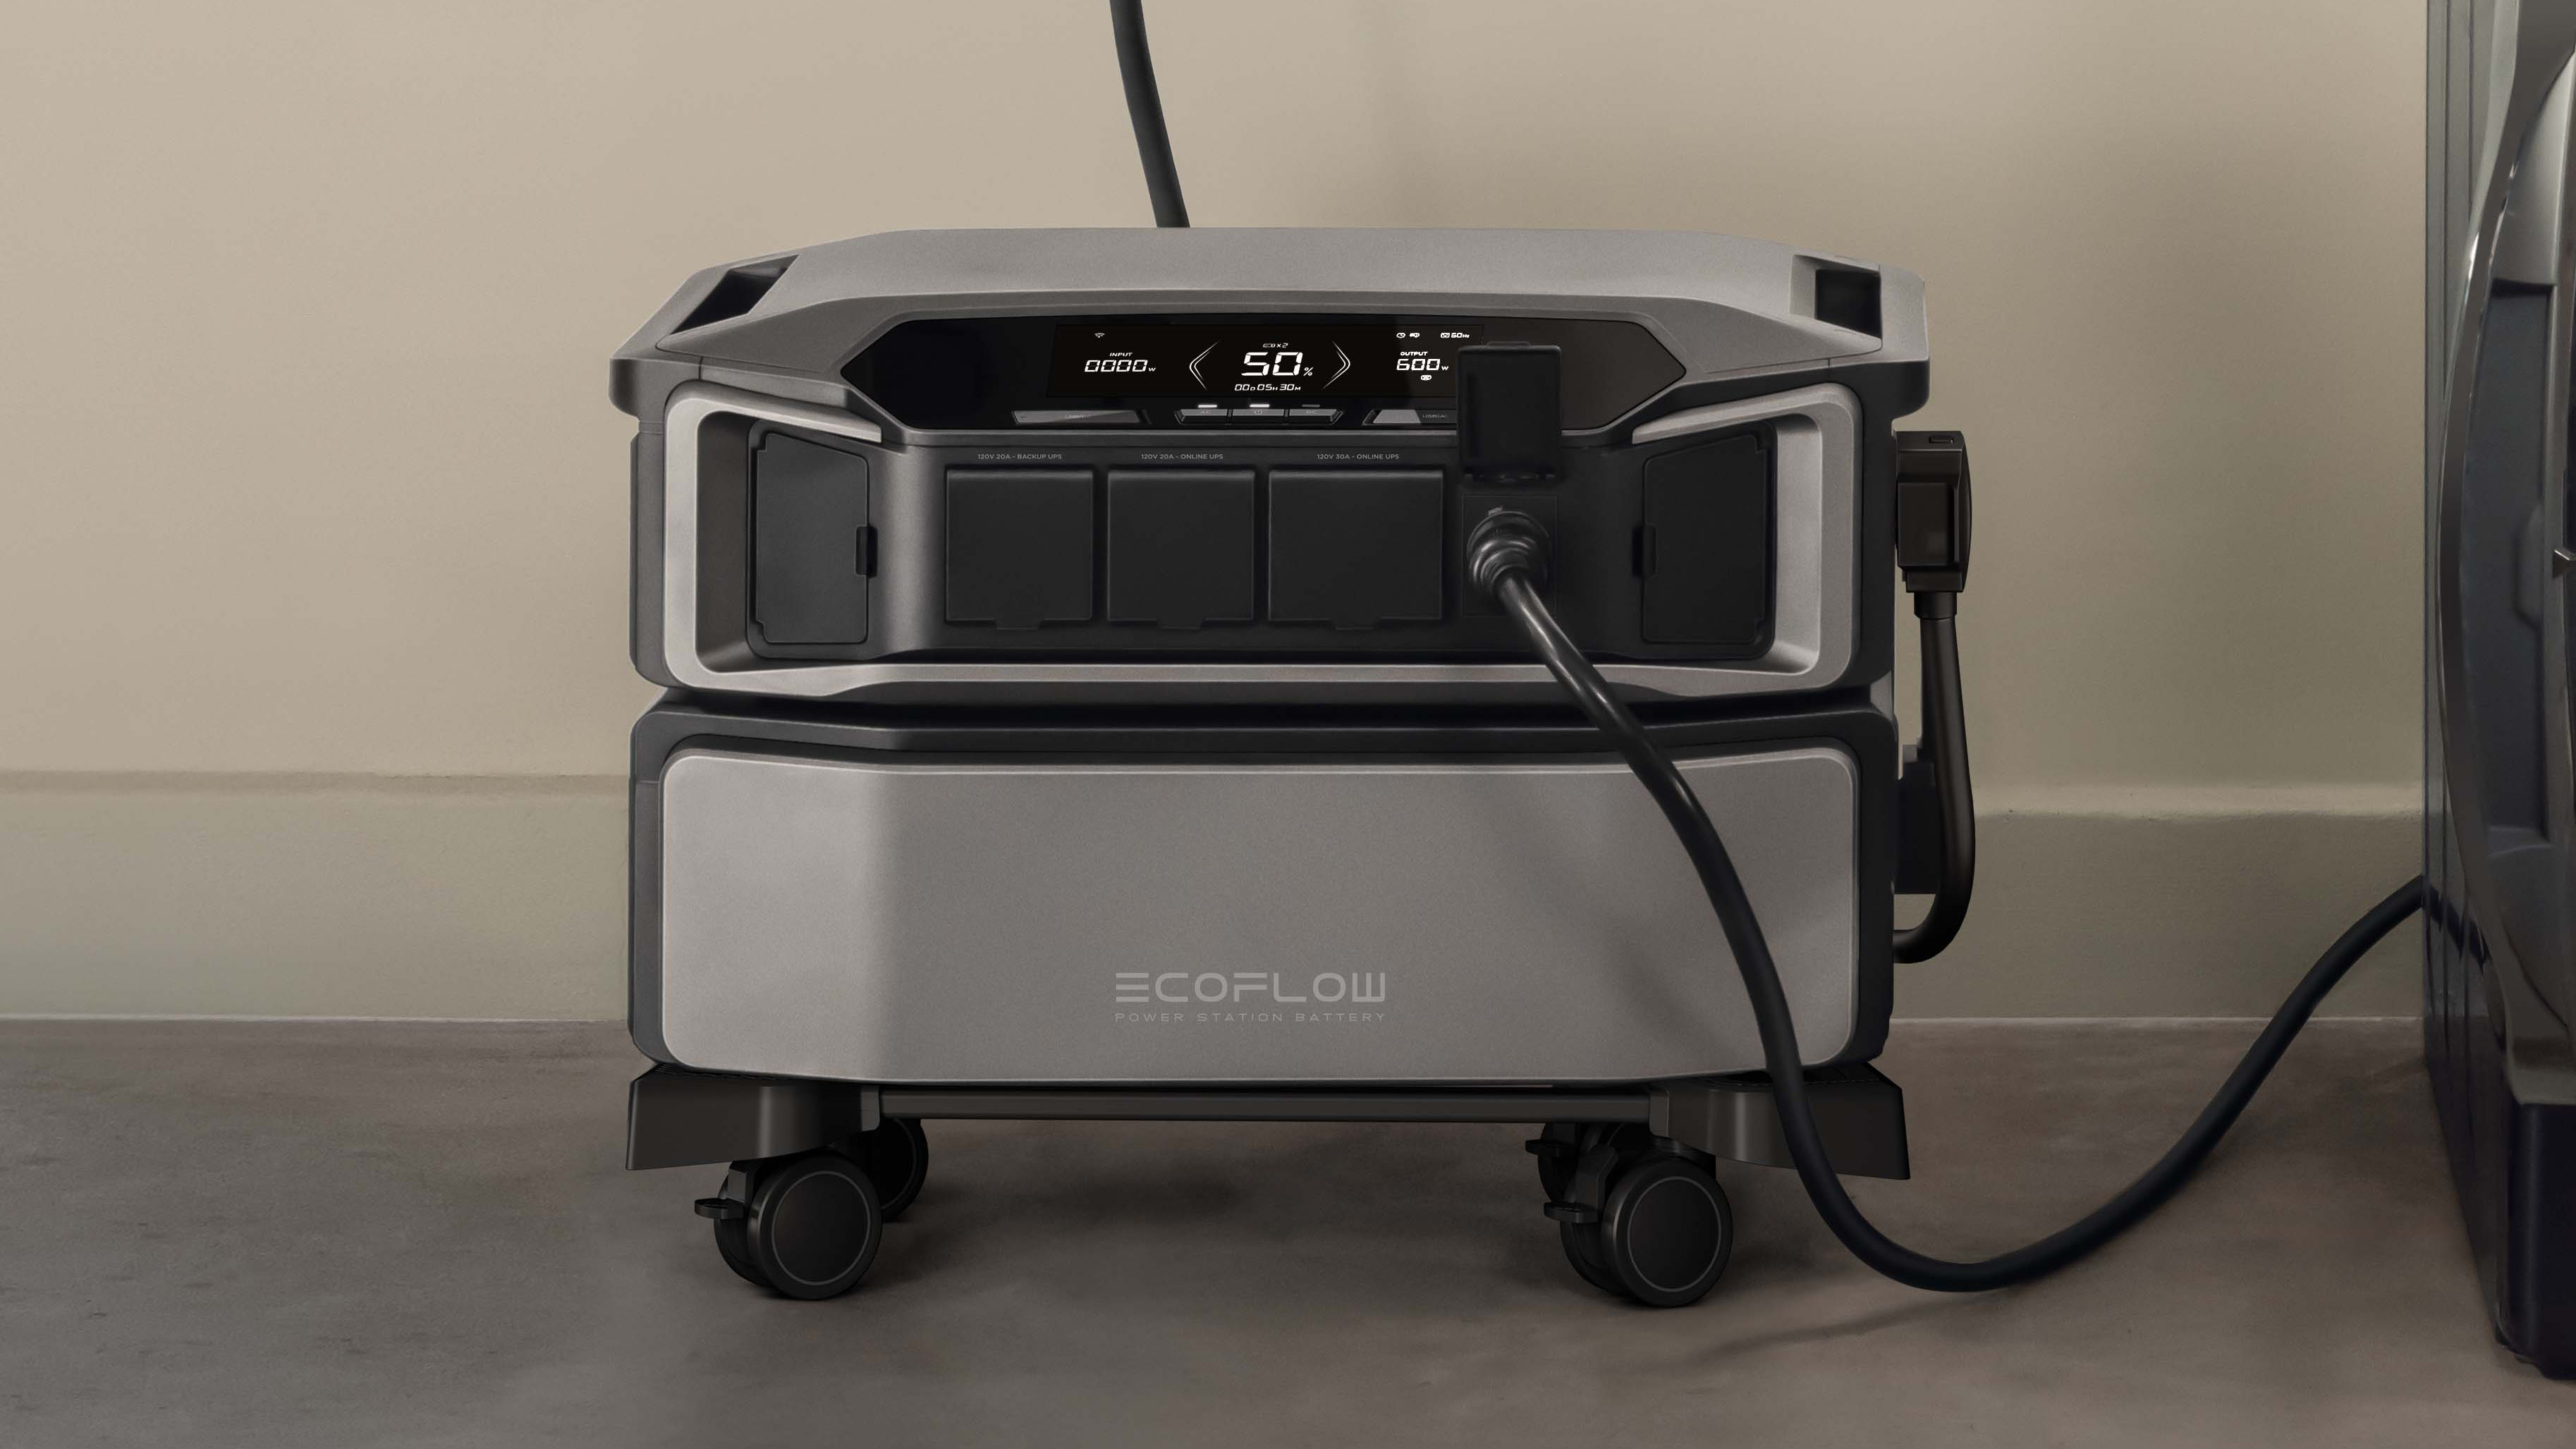 EcoFlow Debuts its Whole-home Backup Power Solution and Three New